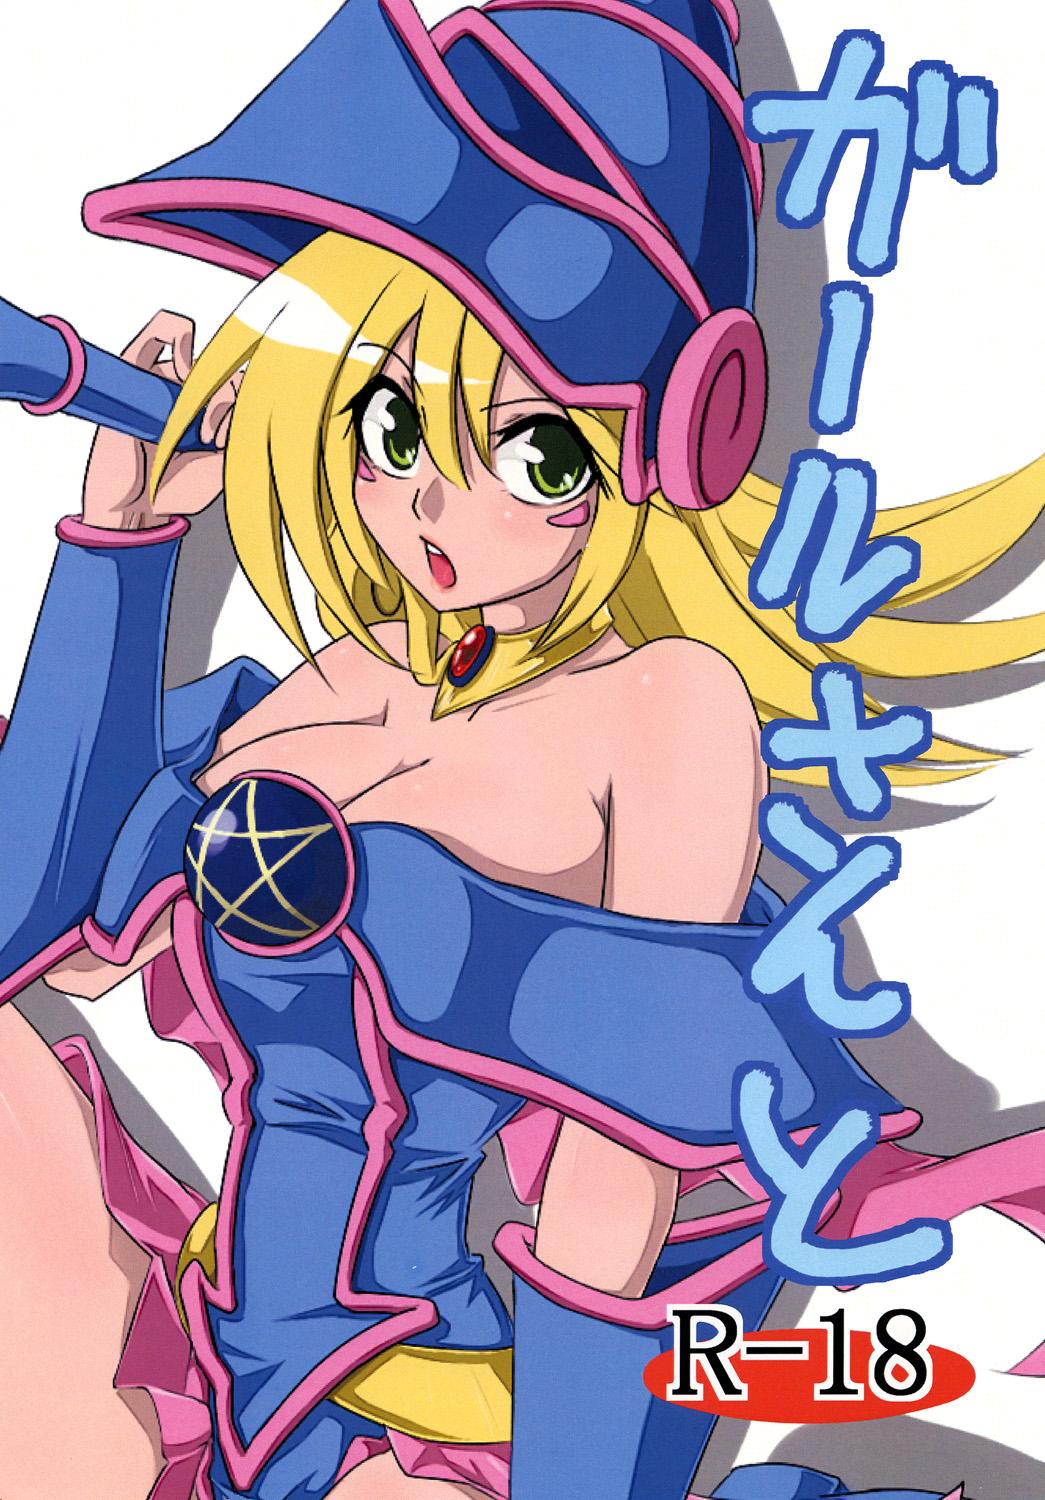 Fucked Girl-san to - Yu gi oh Oil - Picture 1